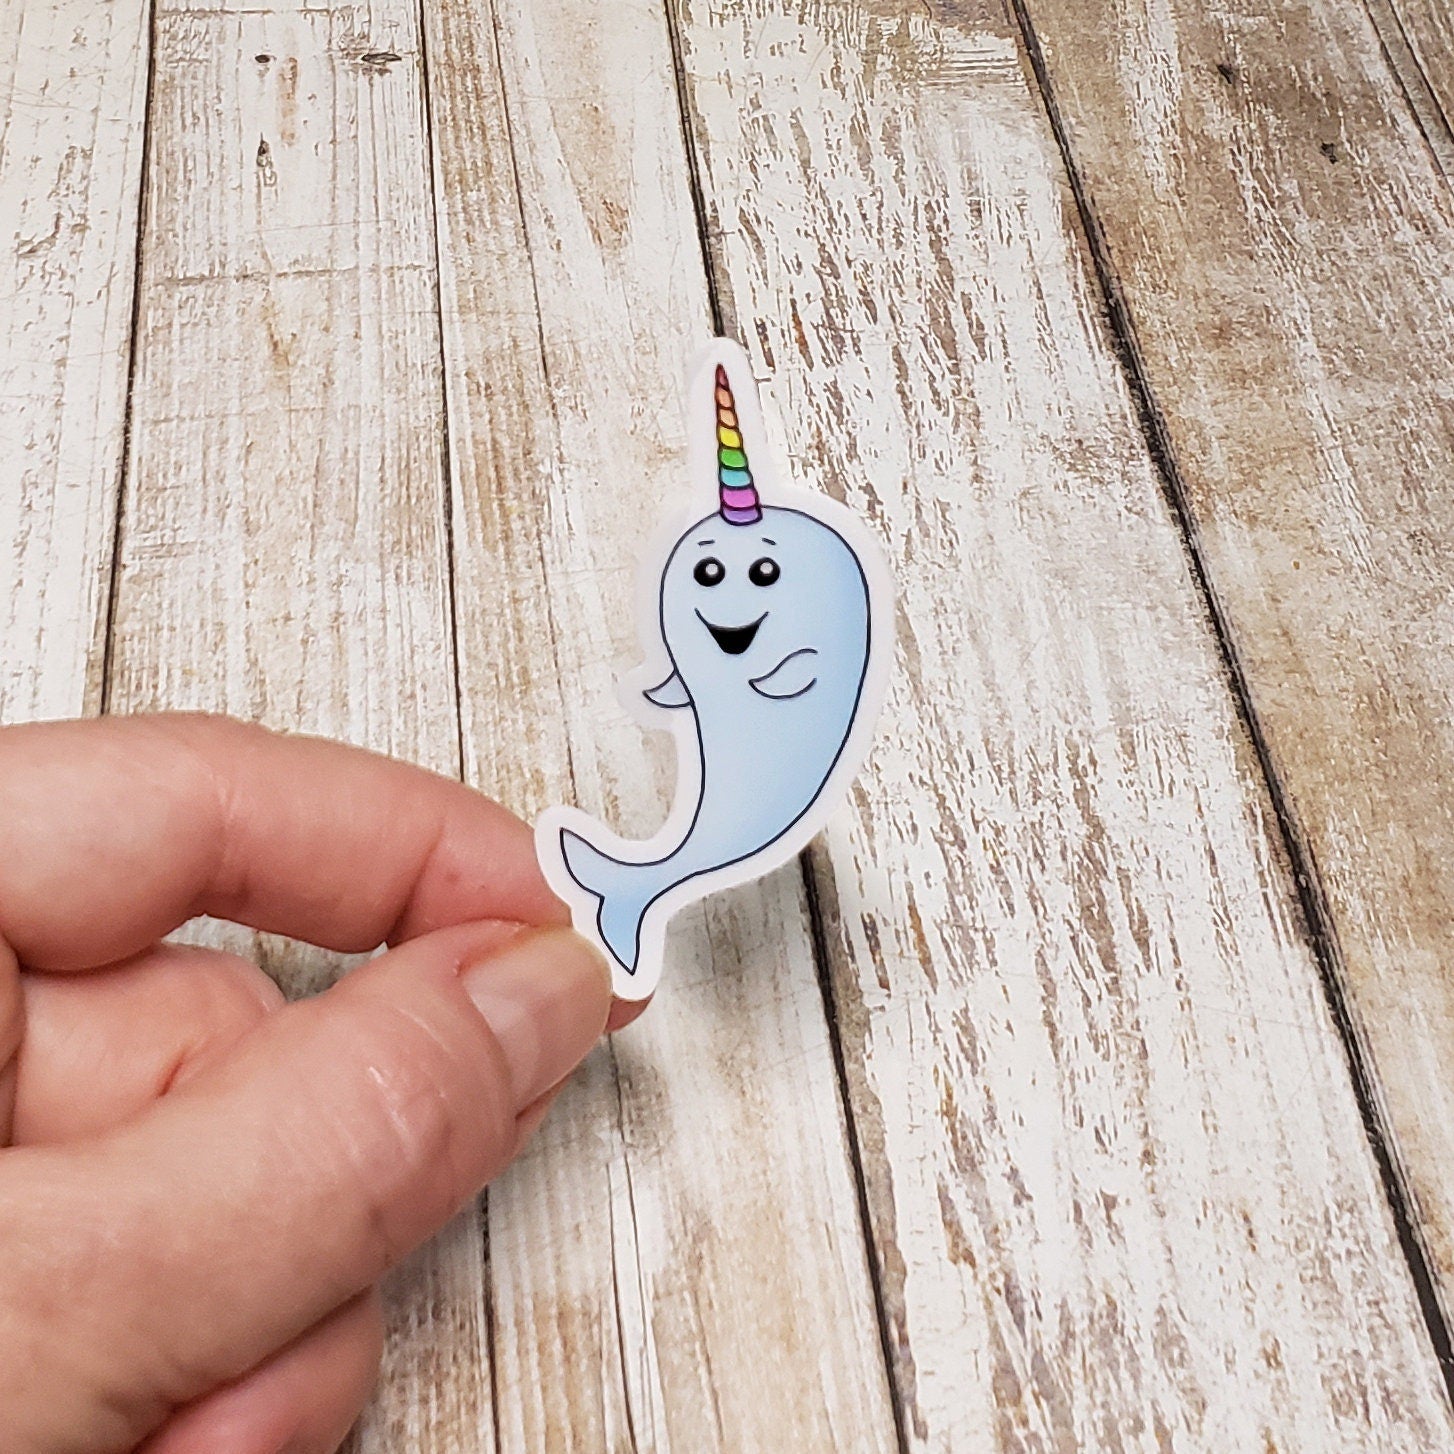 A photo of a cute sticker. It has a smiling narwhal on it. Its horn is colourful, like a unicorn.